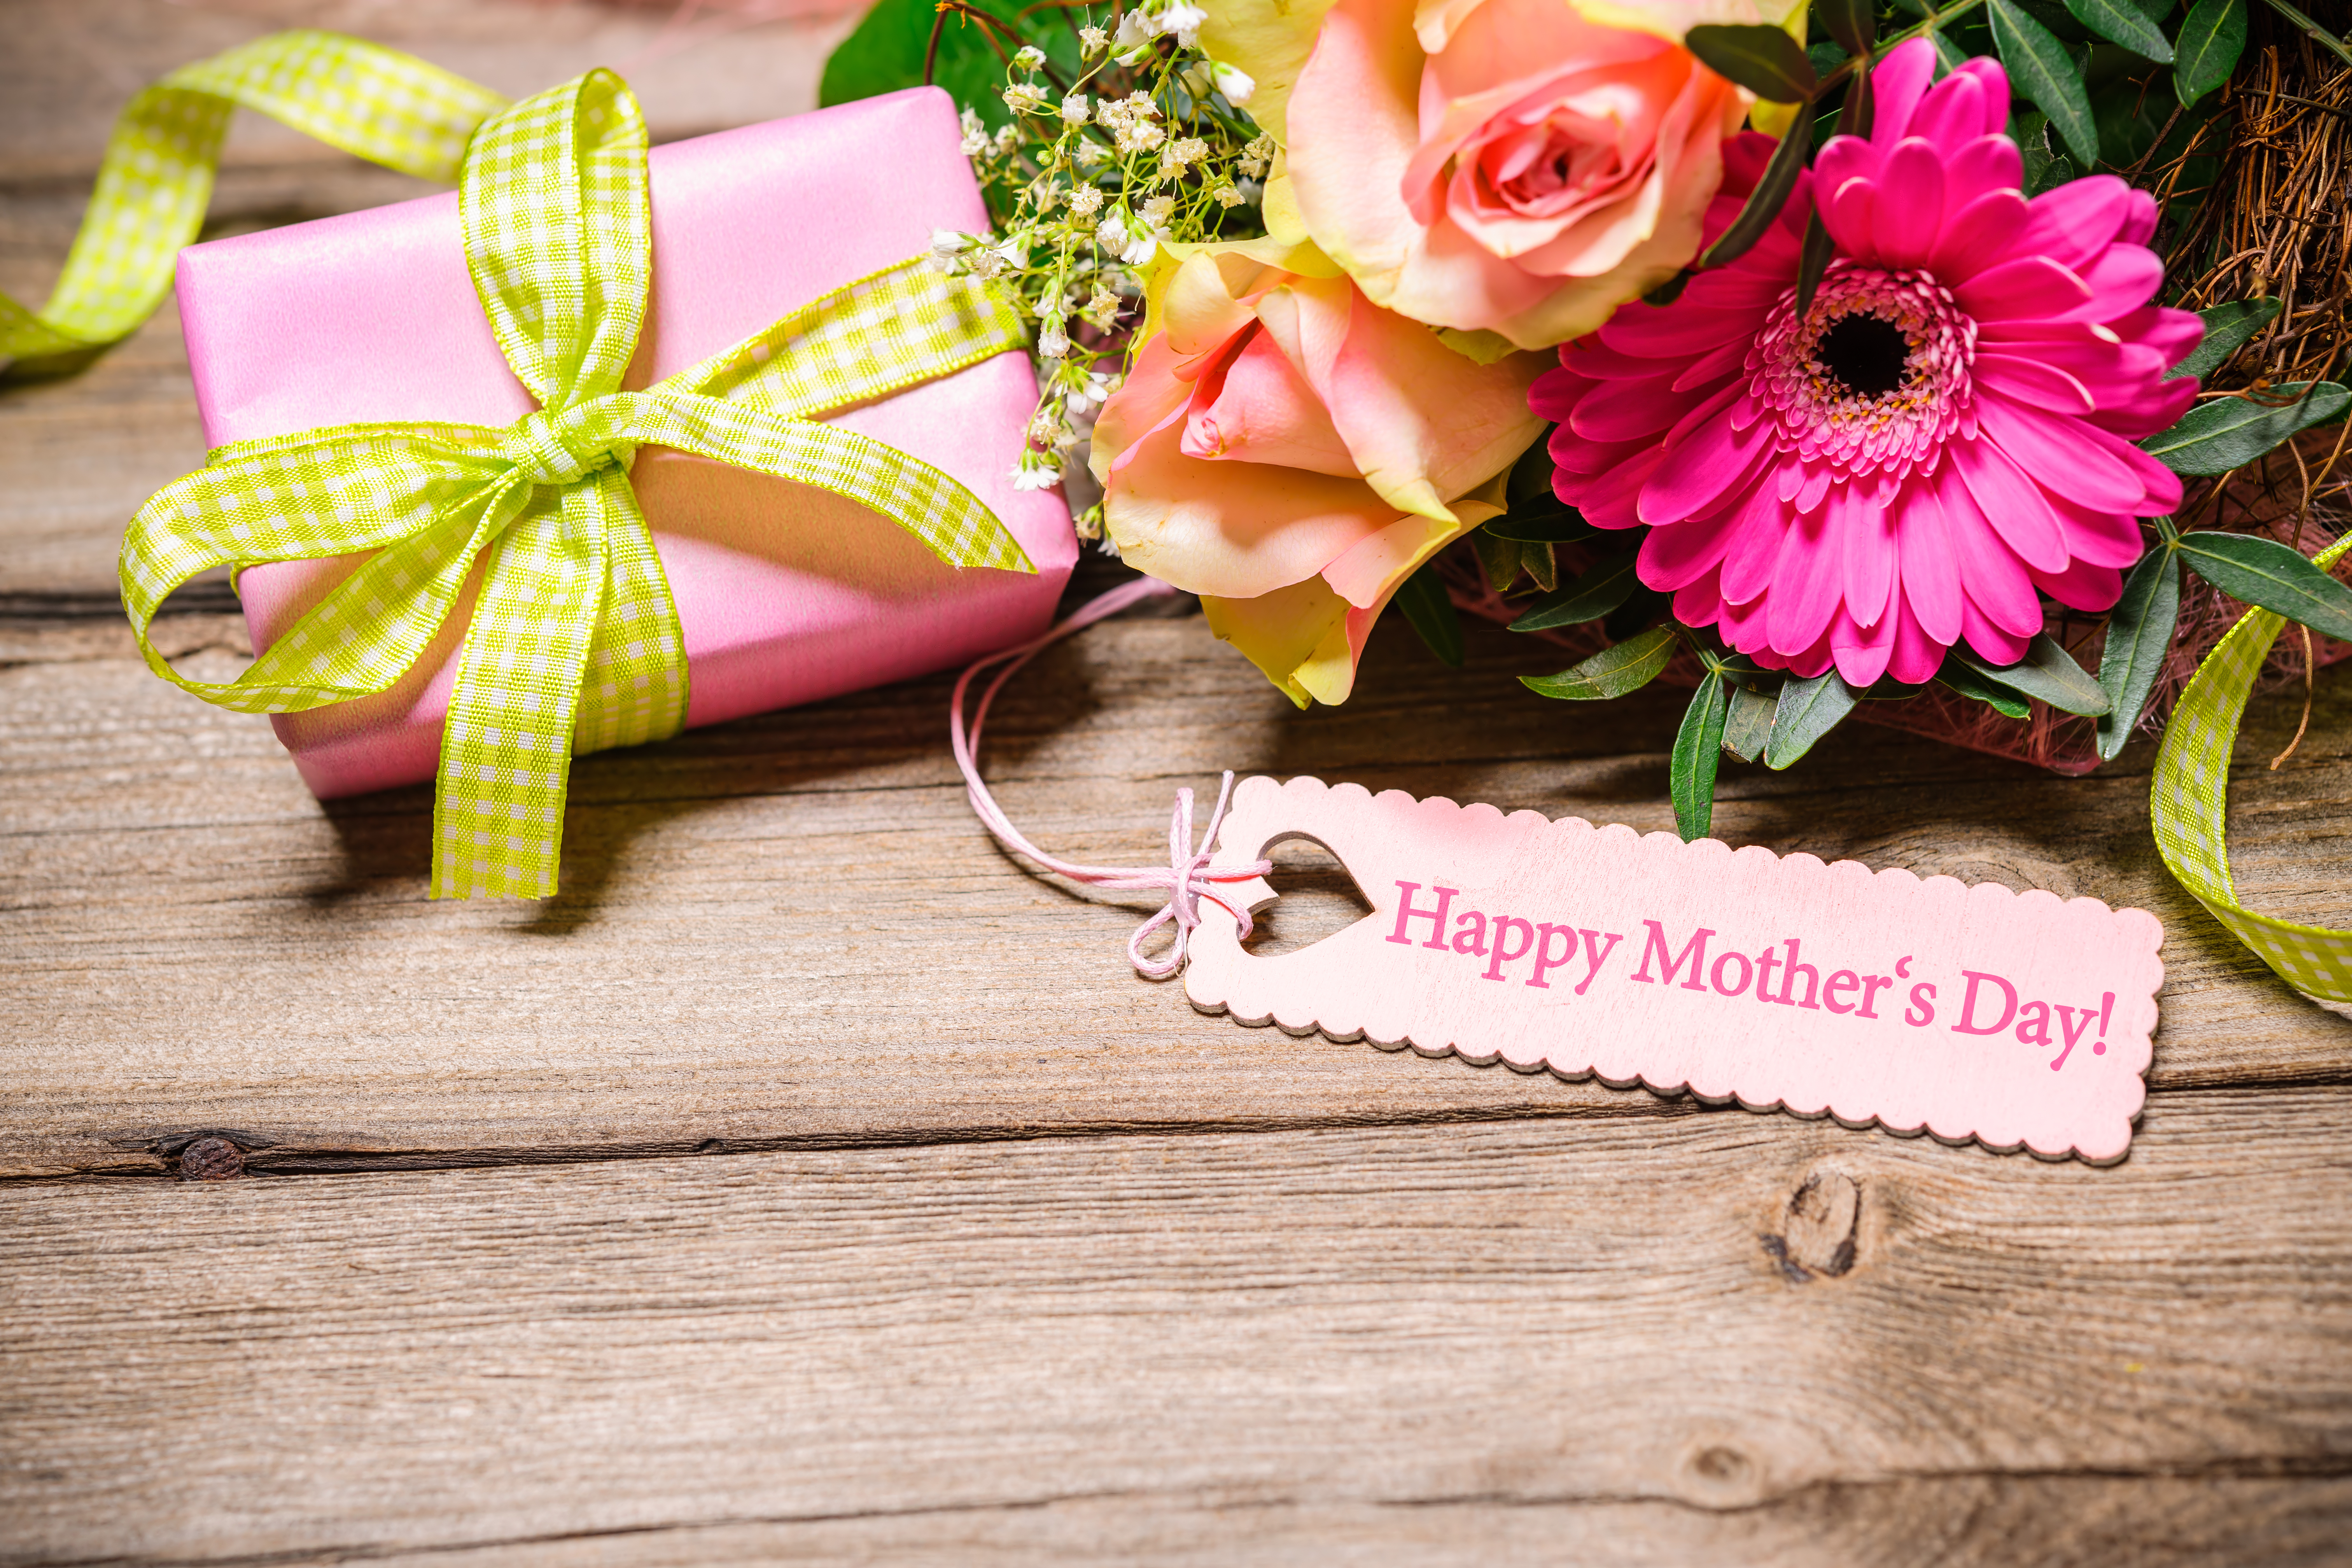 Quick History of Mothers Day Gifts